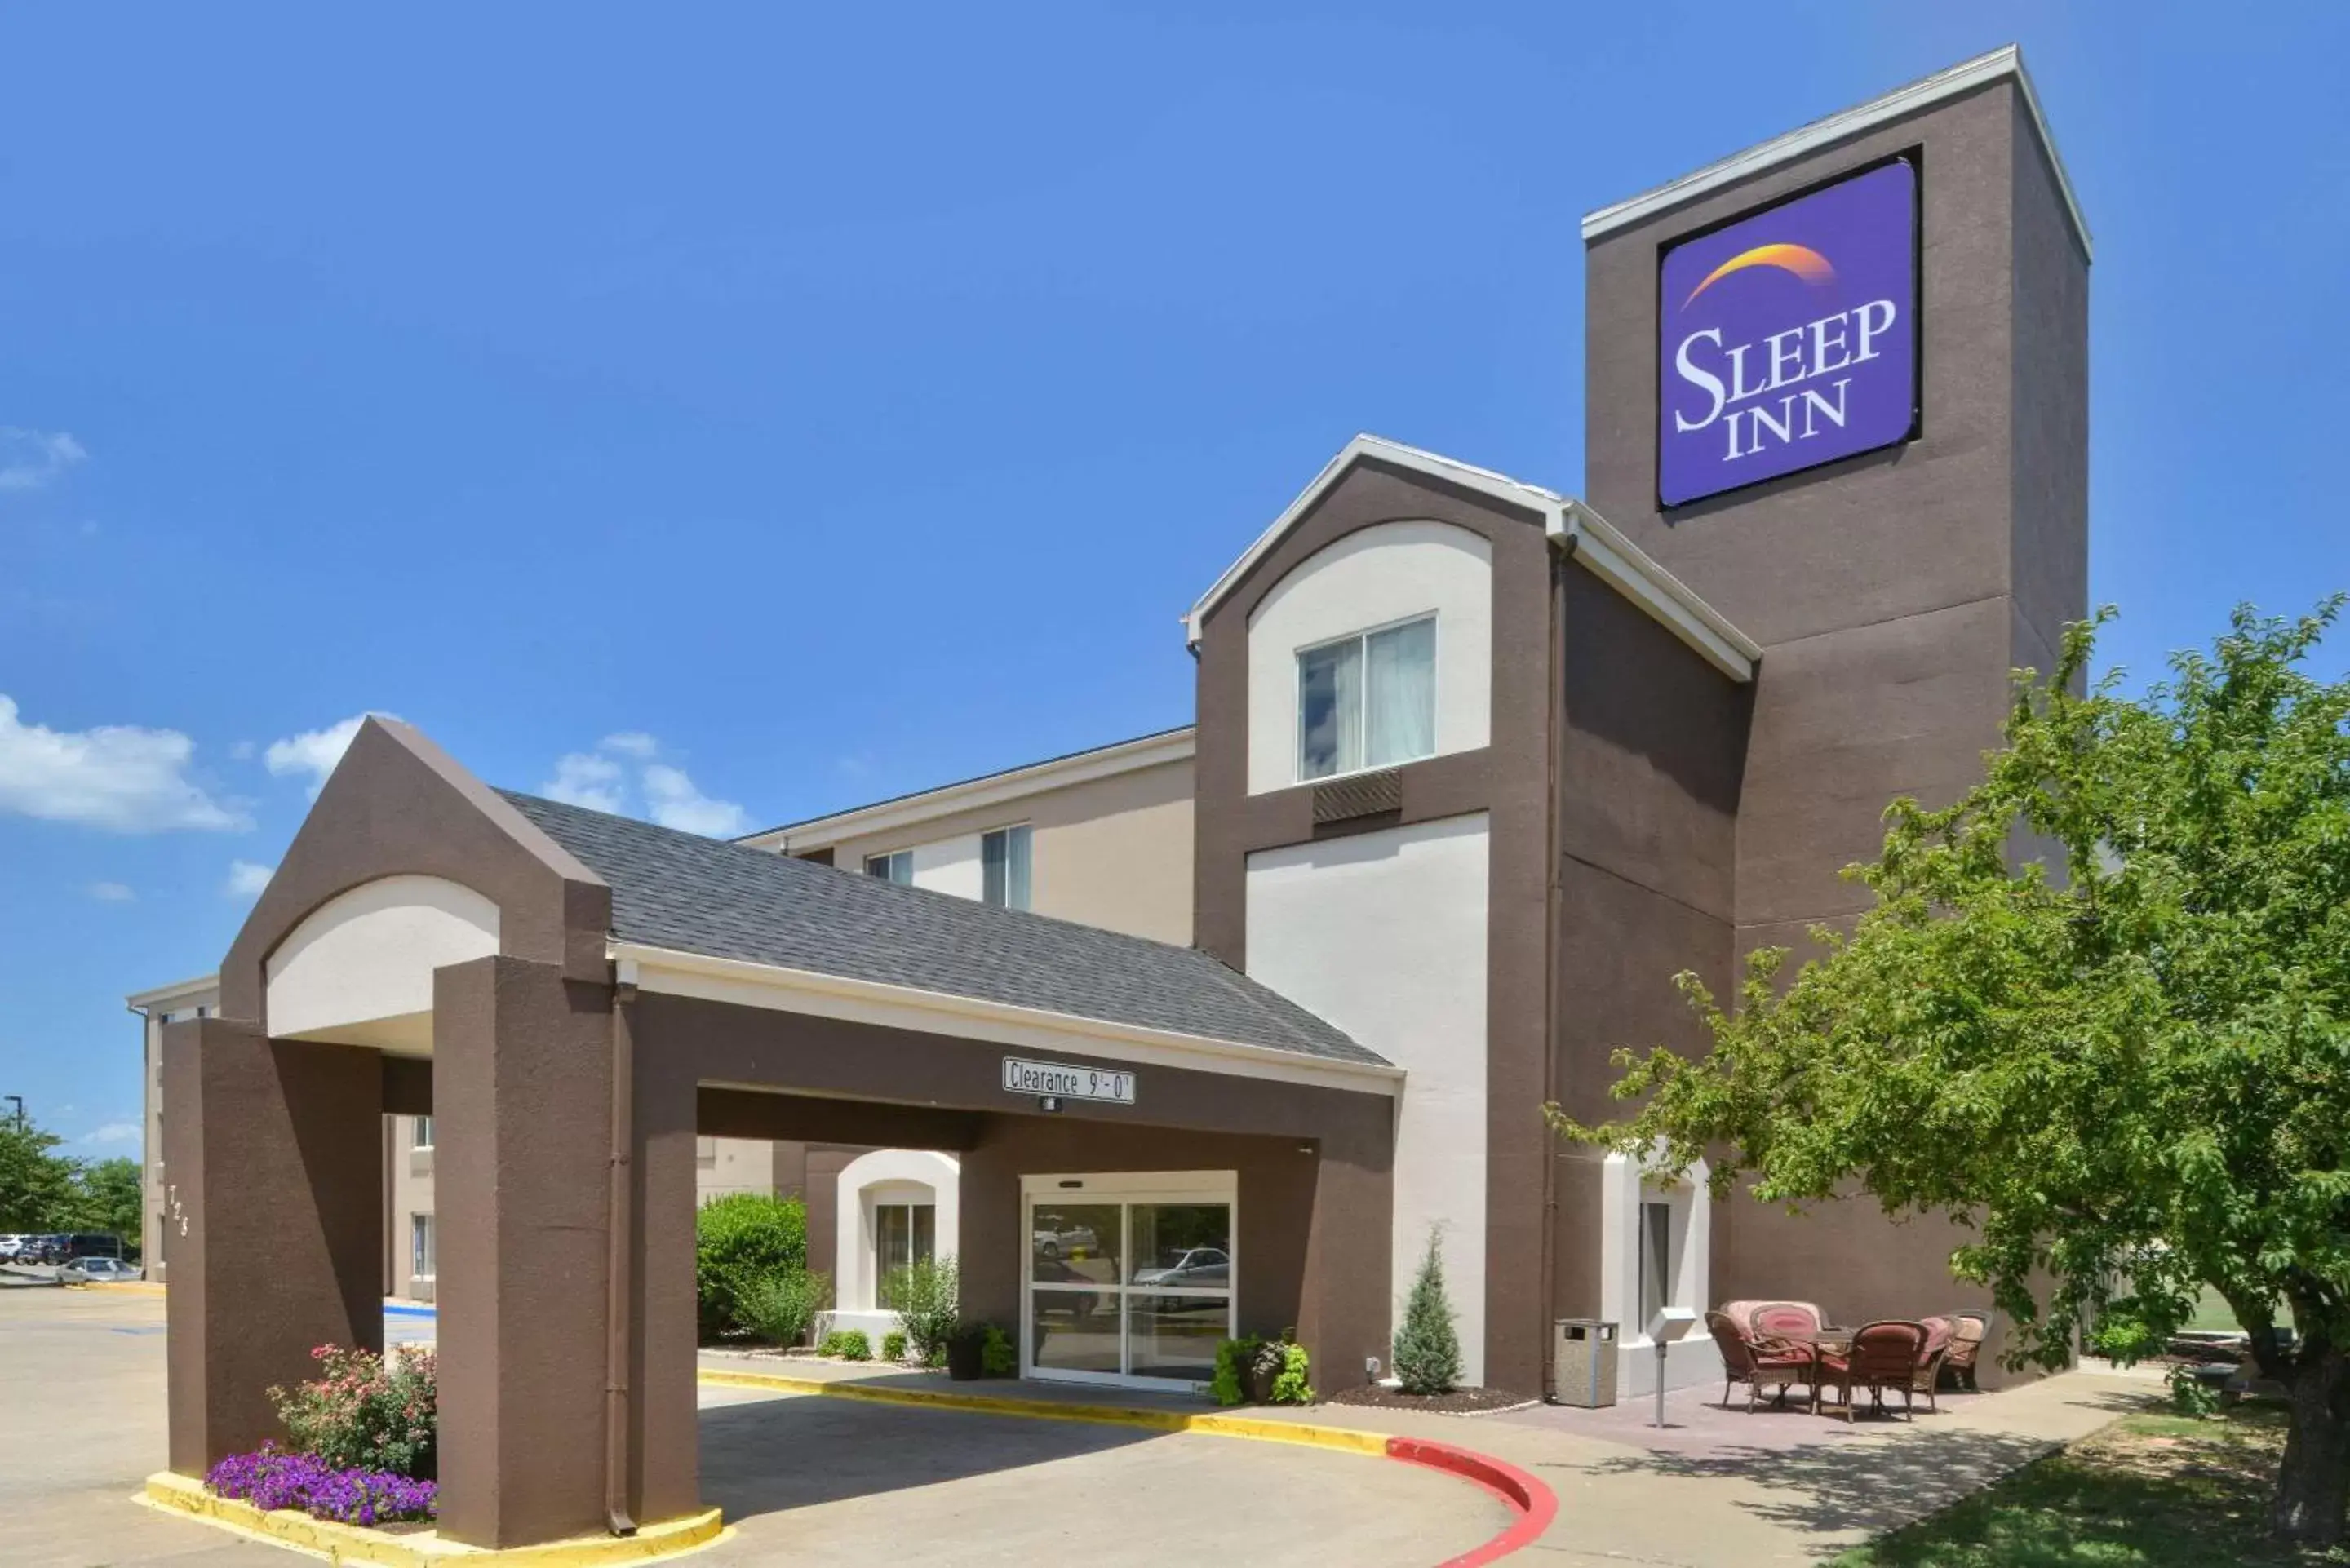 Property building in Sleep Inn Fayetteville North